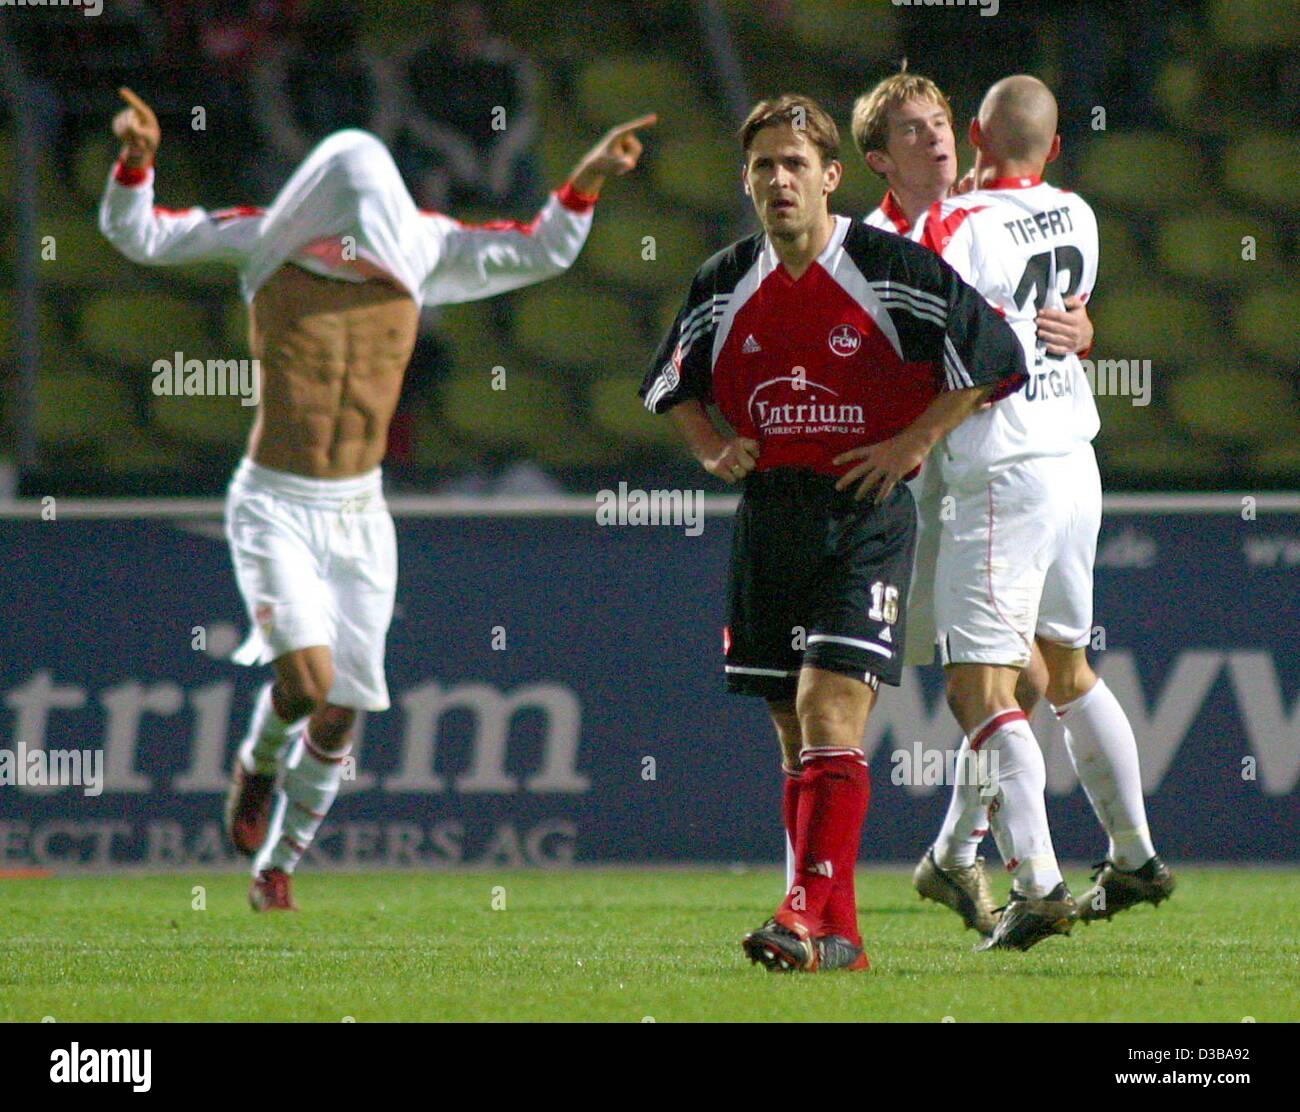 (dpa) - Stuttgart's goal scorer Kevin Kuranyi pulls the tricot over his head while Nuremberg's Tommy Larsen (2nd from L) looks disappointed during the Bundesliga soccer match VfB Stuttgart against First FC Nuernberg in Nuremberg, Germany, 20 October 2002. On the right Stuttgart's players Aliaksandr  Stock Photo